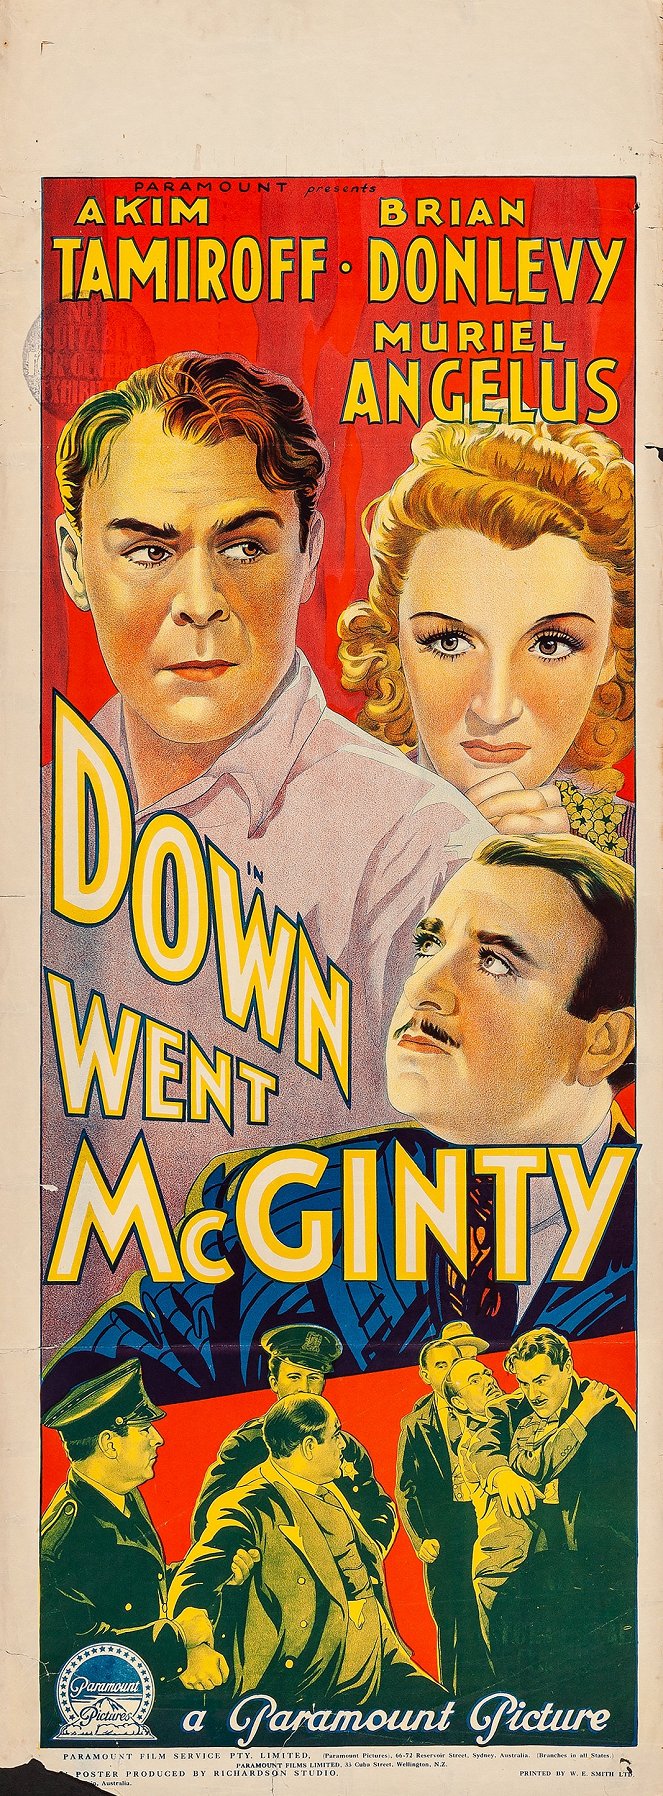 The Great McGinty - Posters